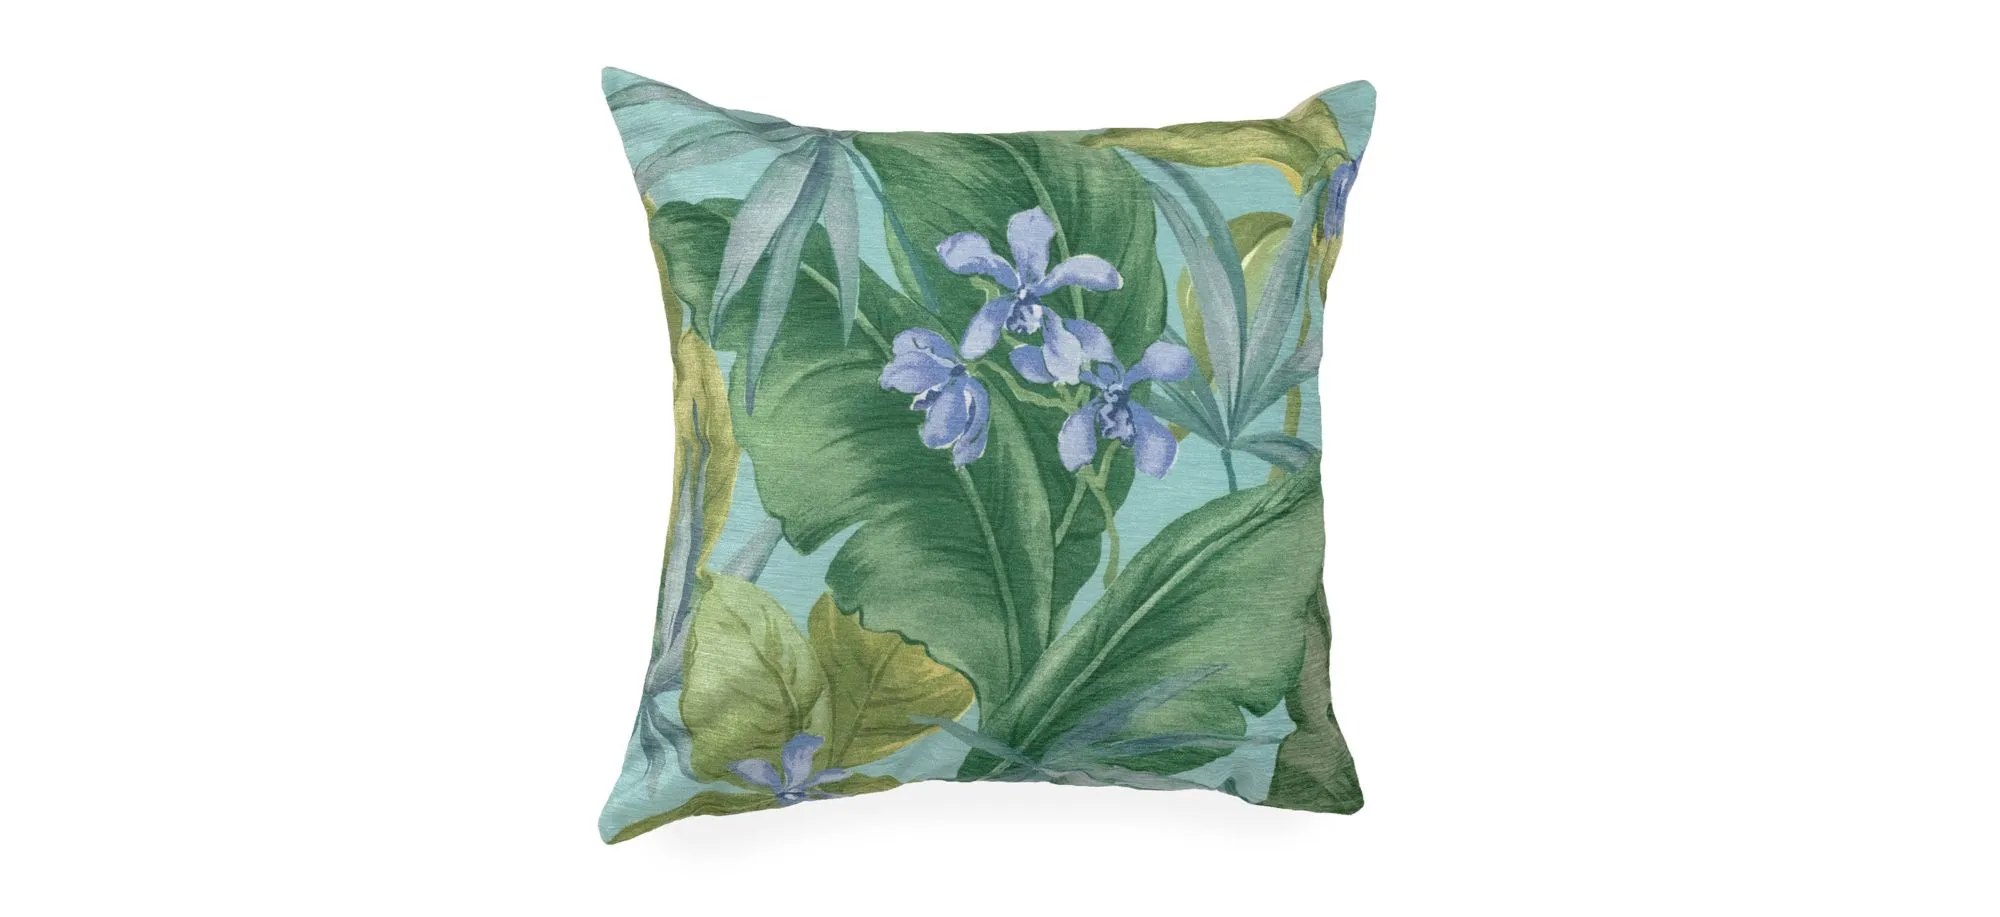 Liora Manne Illusions Tropical Leaf Pillow in Aqua by Trans-Ocean Import Co Inc